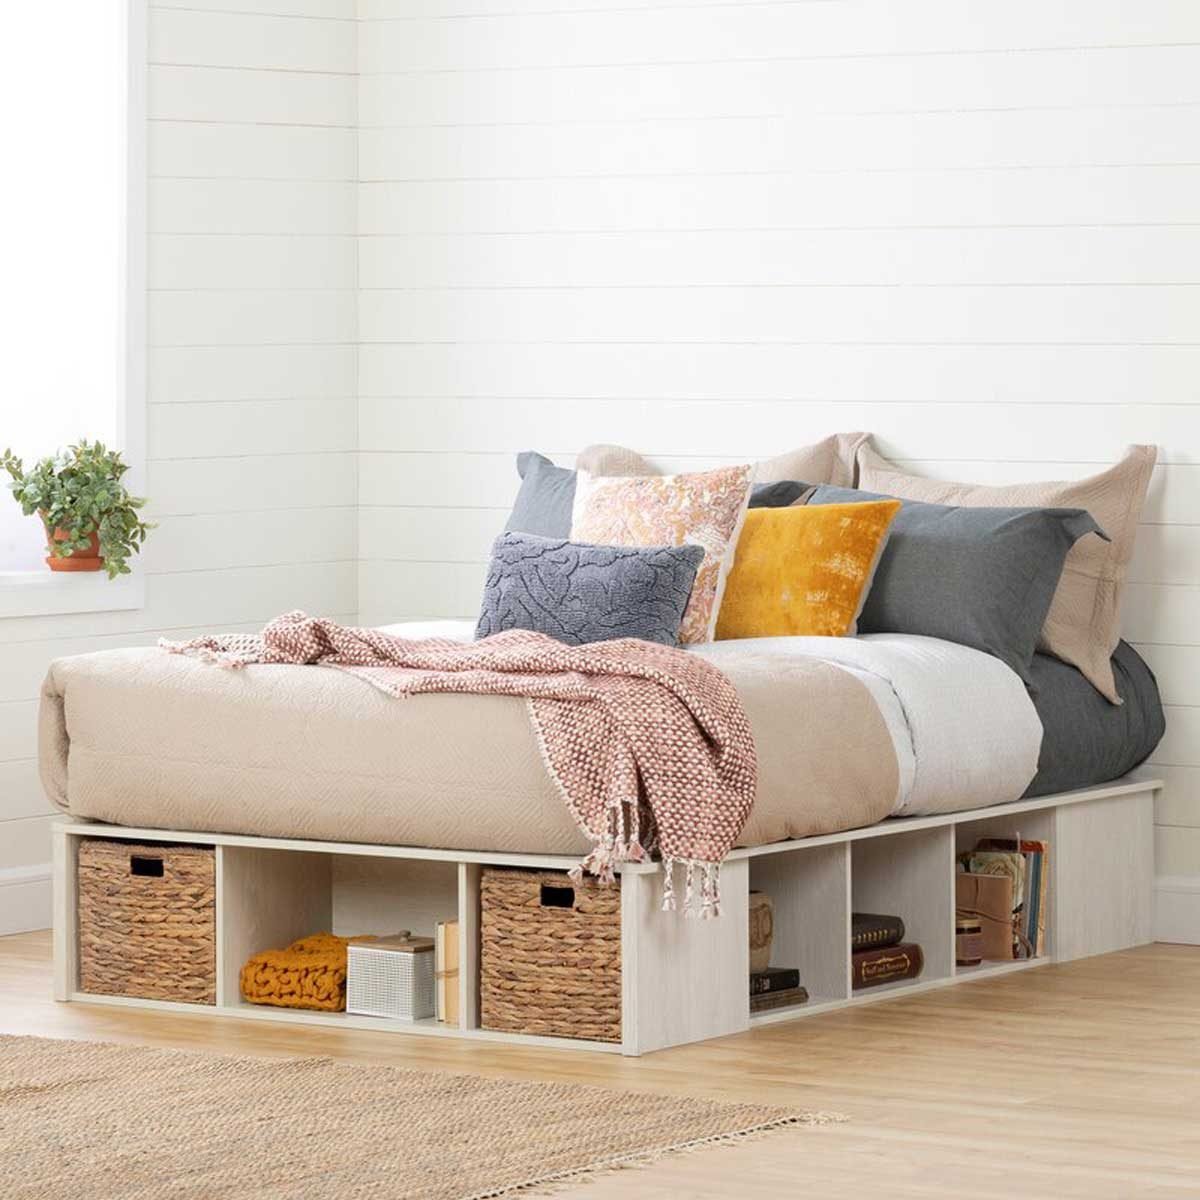 10 Storage Beds That Are Just as Stylish as They Are Useful